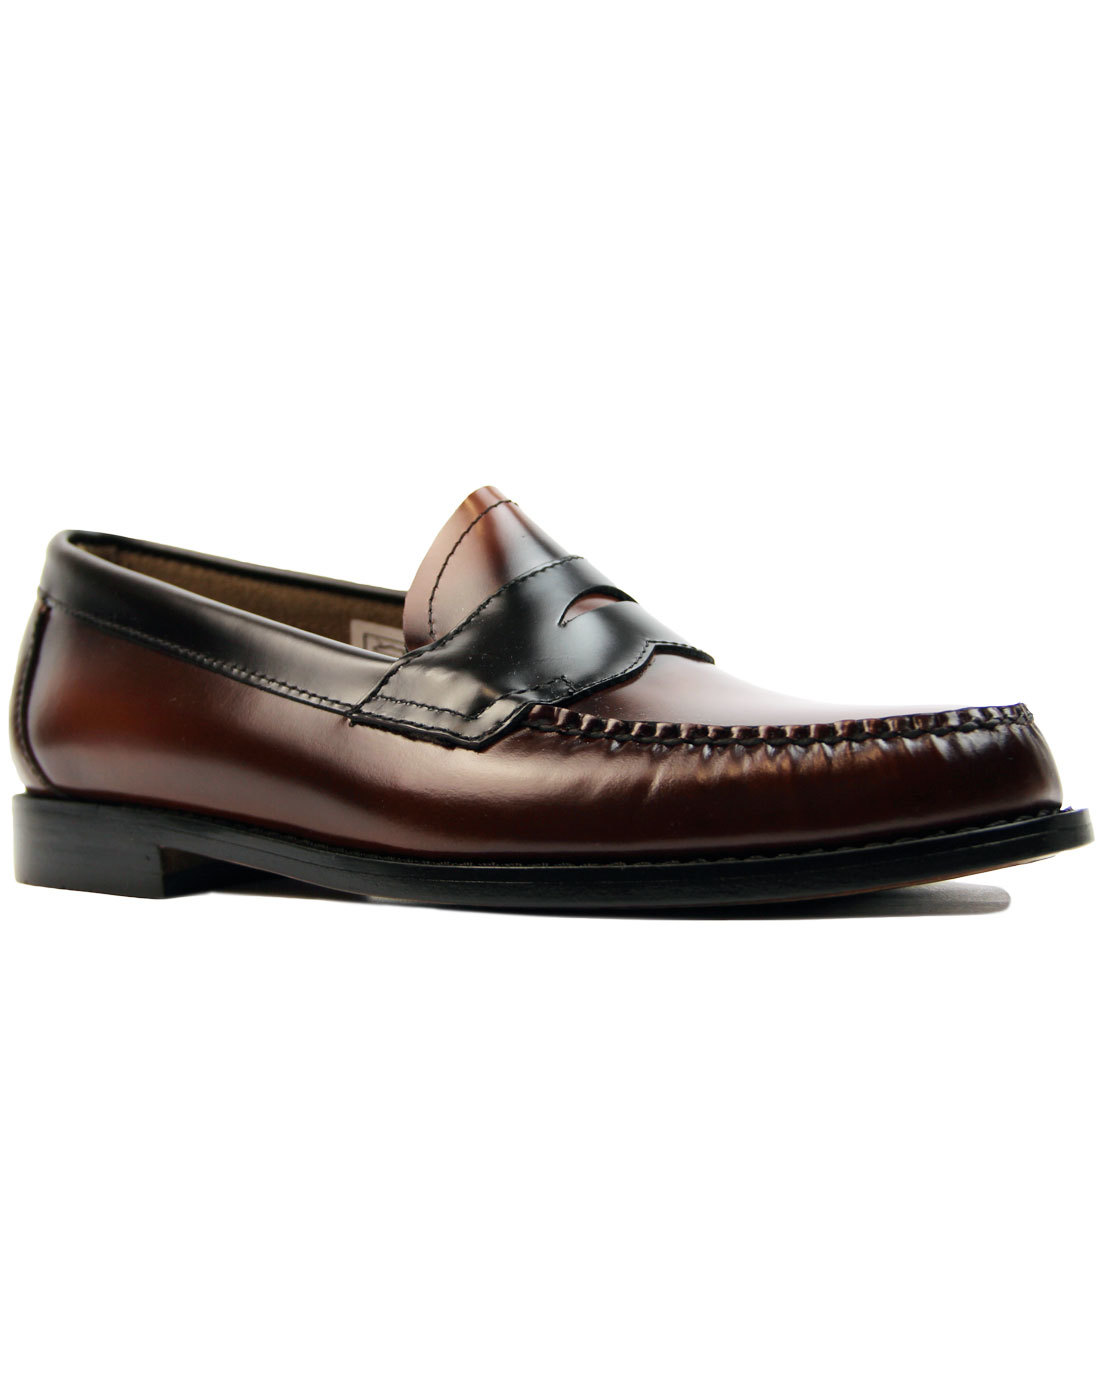 Logan Two Tone BASS WEEJUNS Mod Penny Loafers (TB)